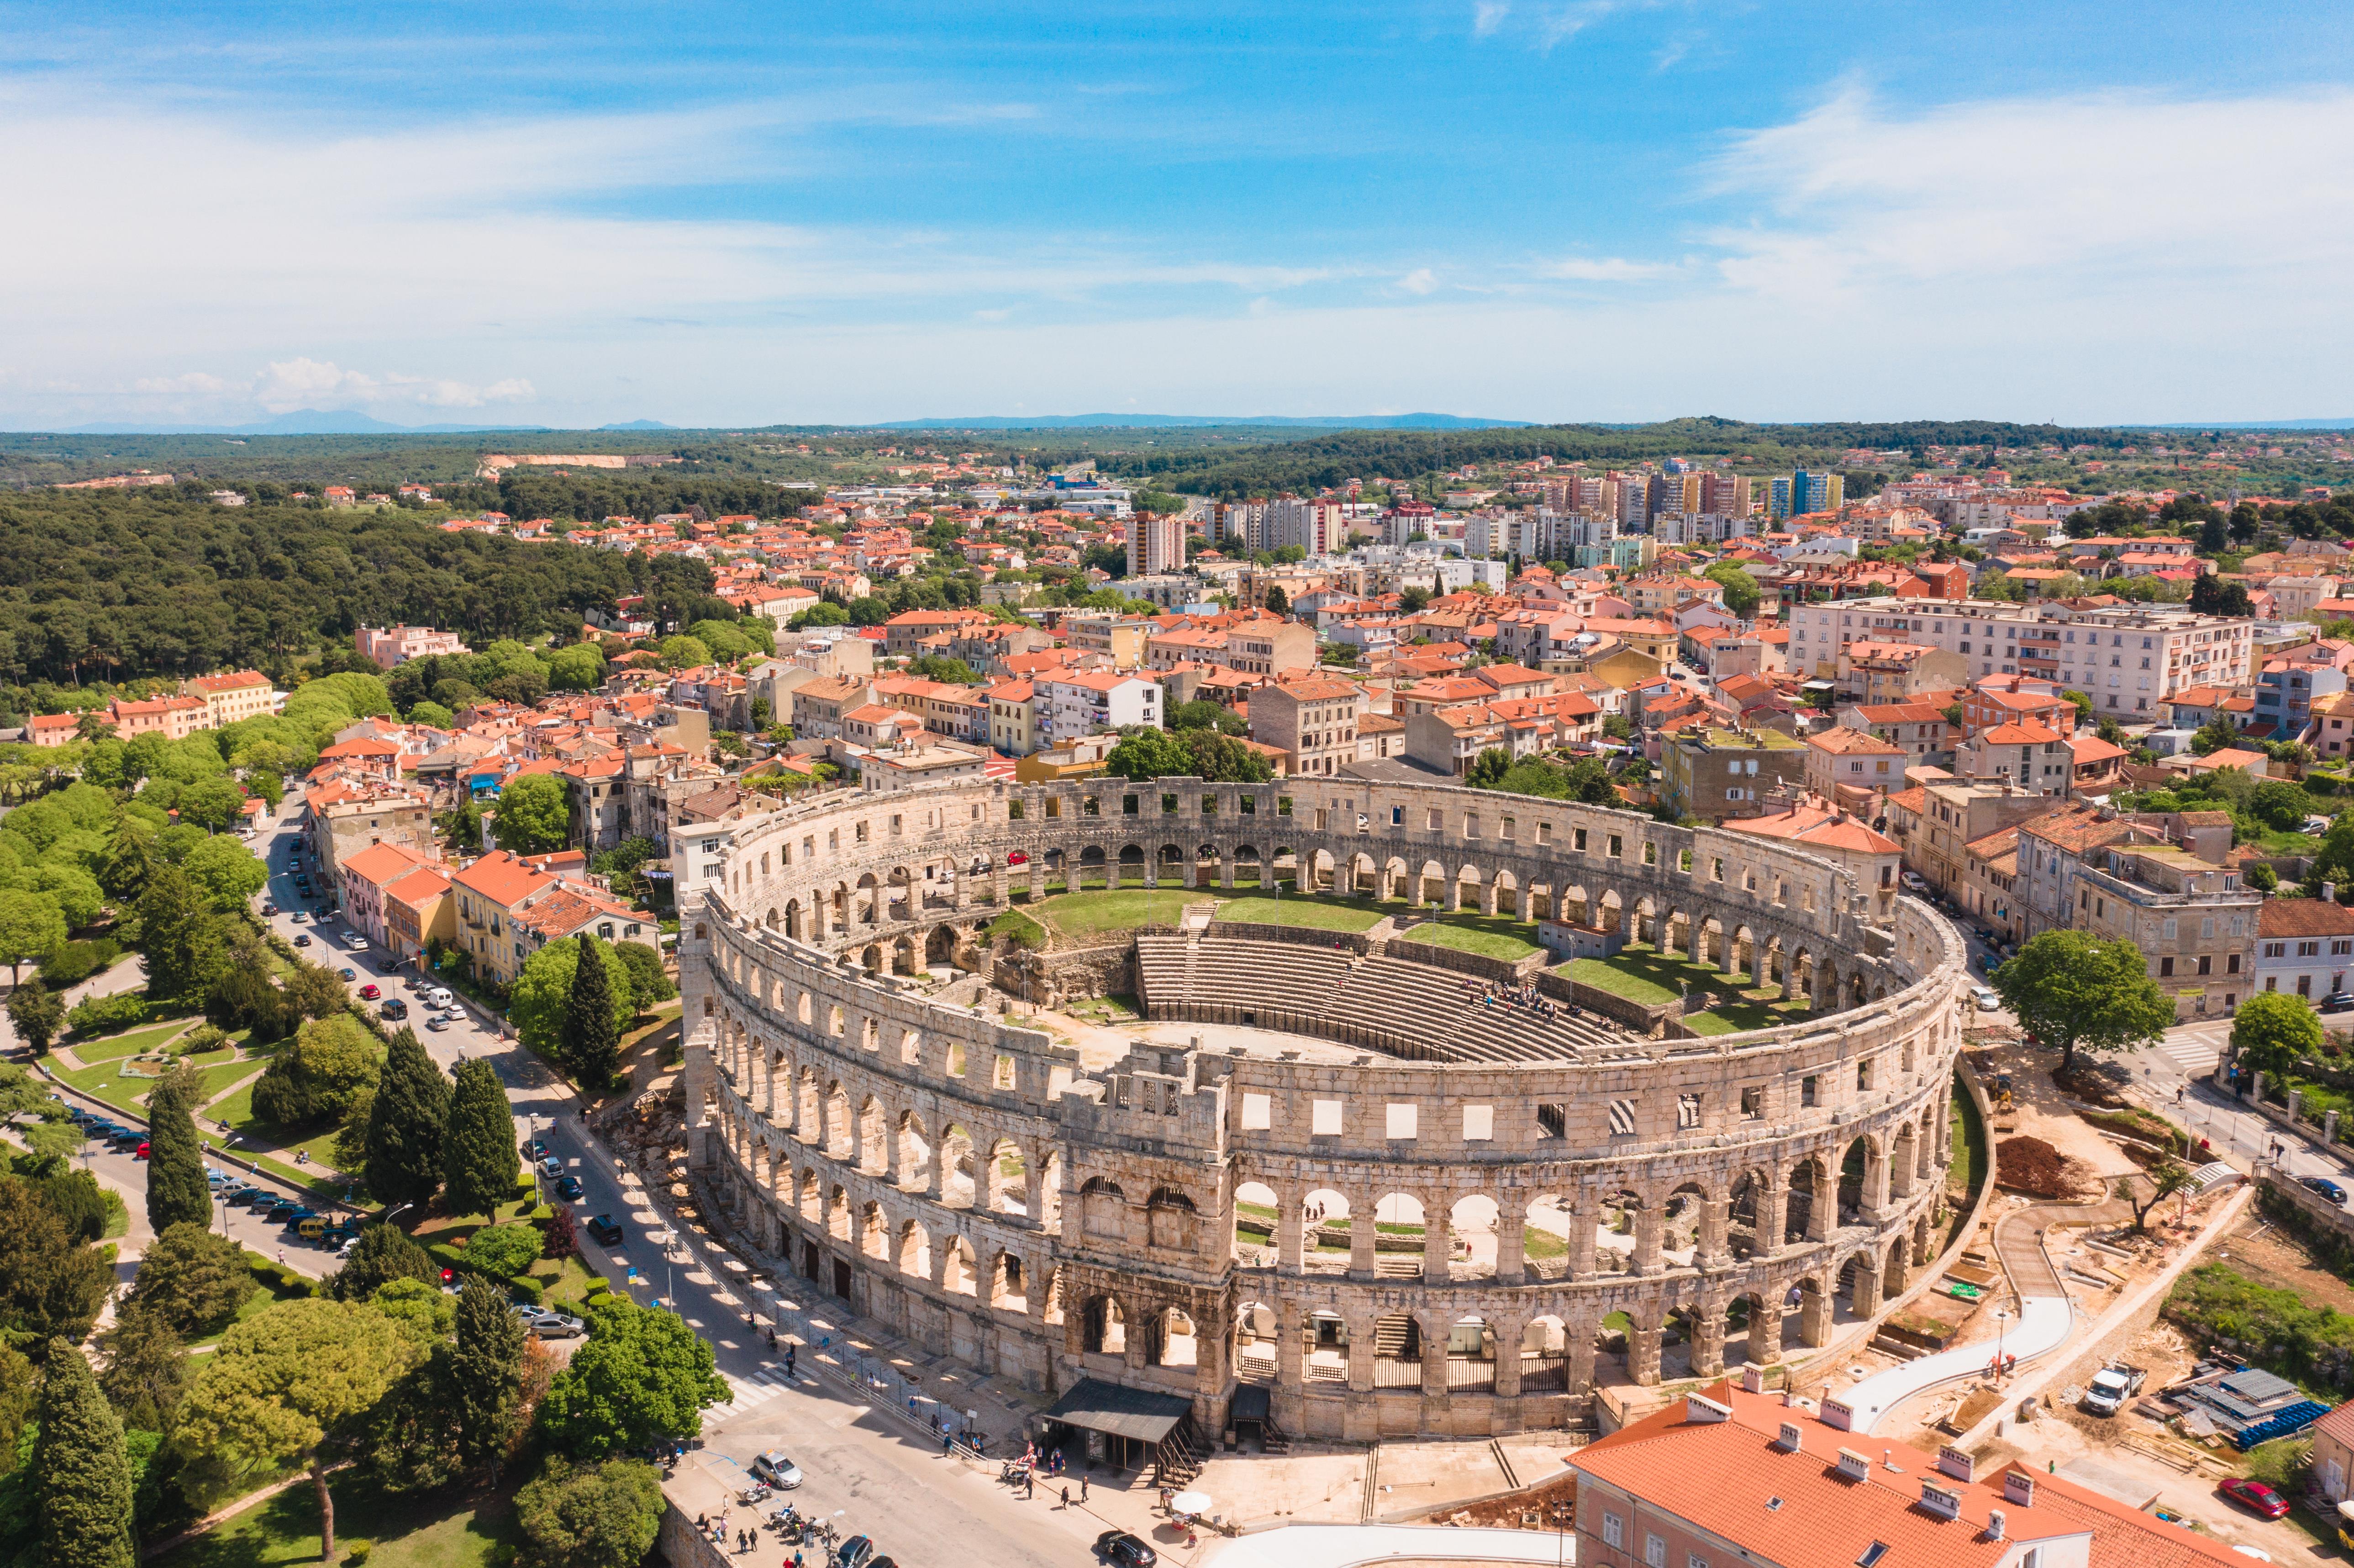 Step back in time to the Roman era in this incredible amphitheatre in Pula